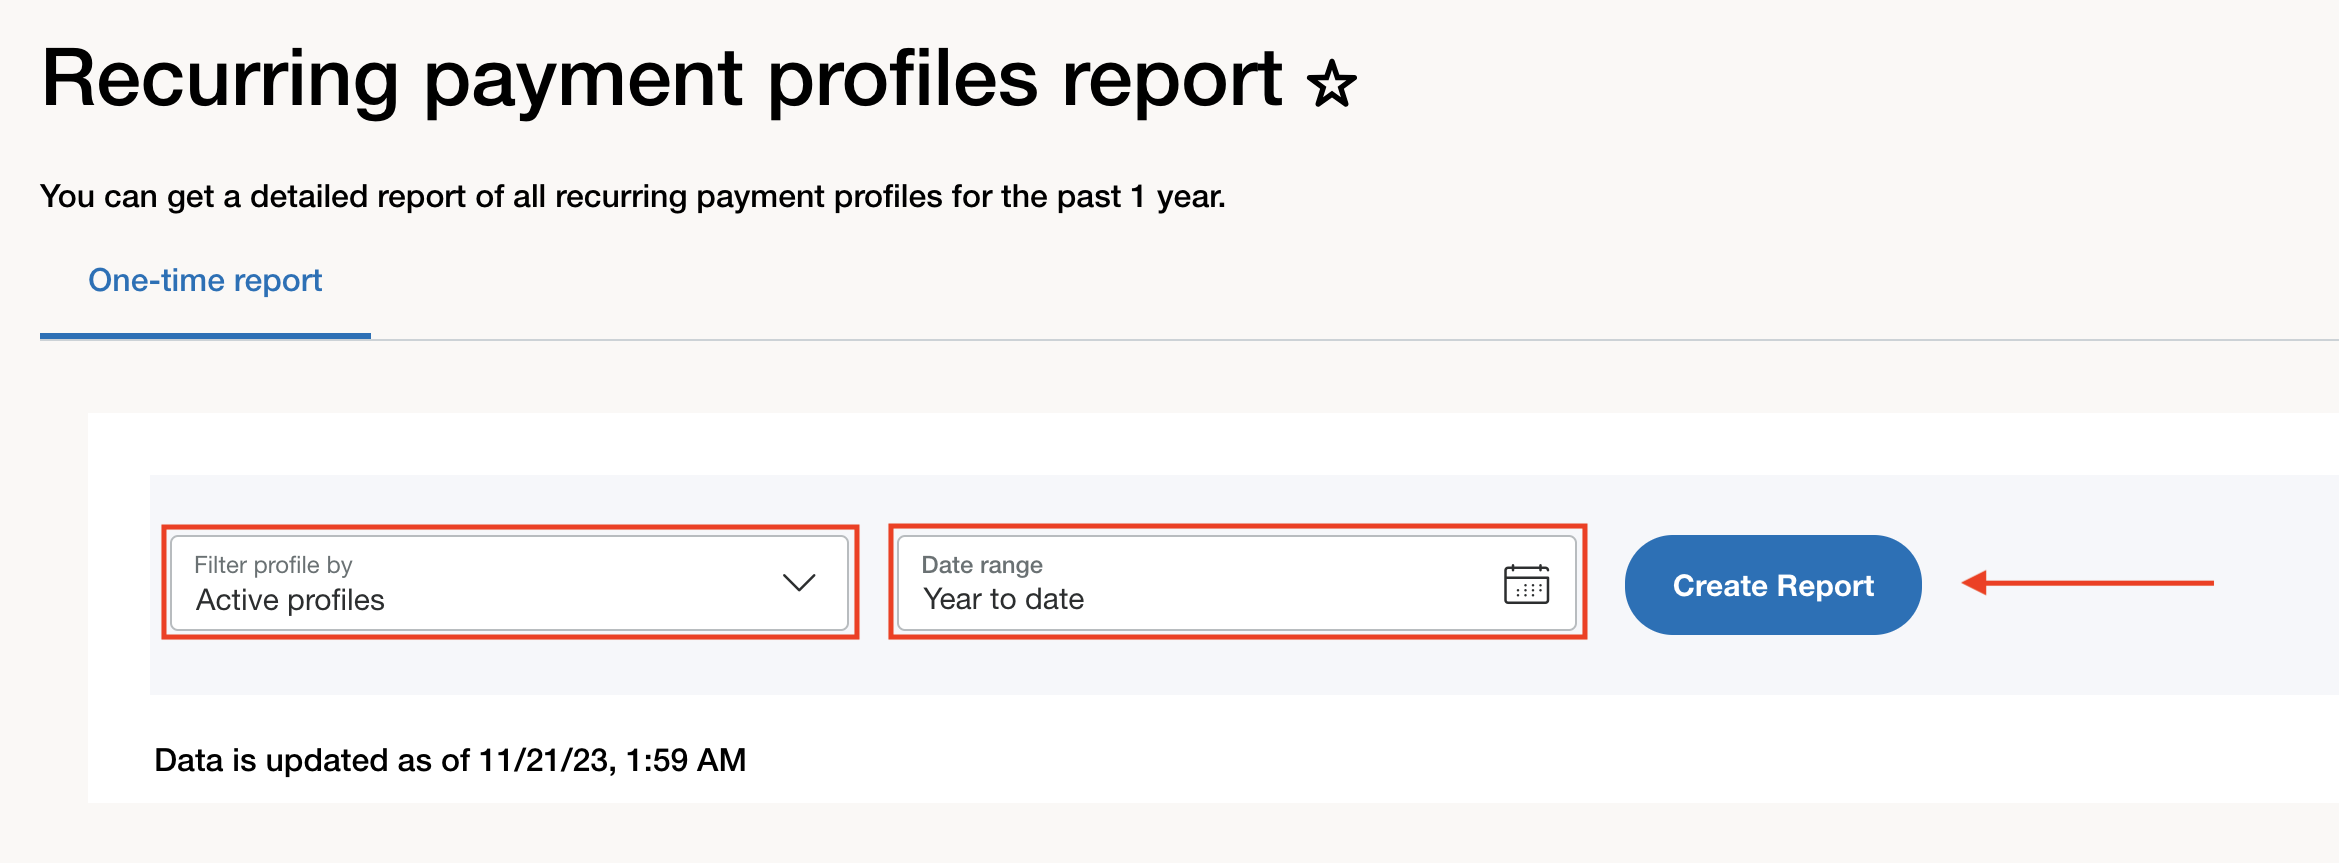 Screenshot of the Reports page showing the location of the Recurring payment profiles report